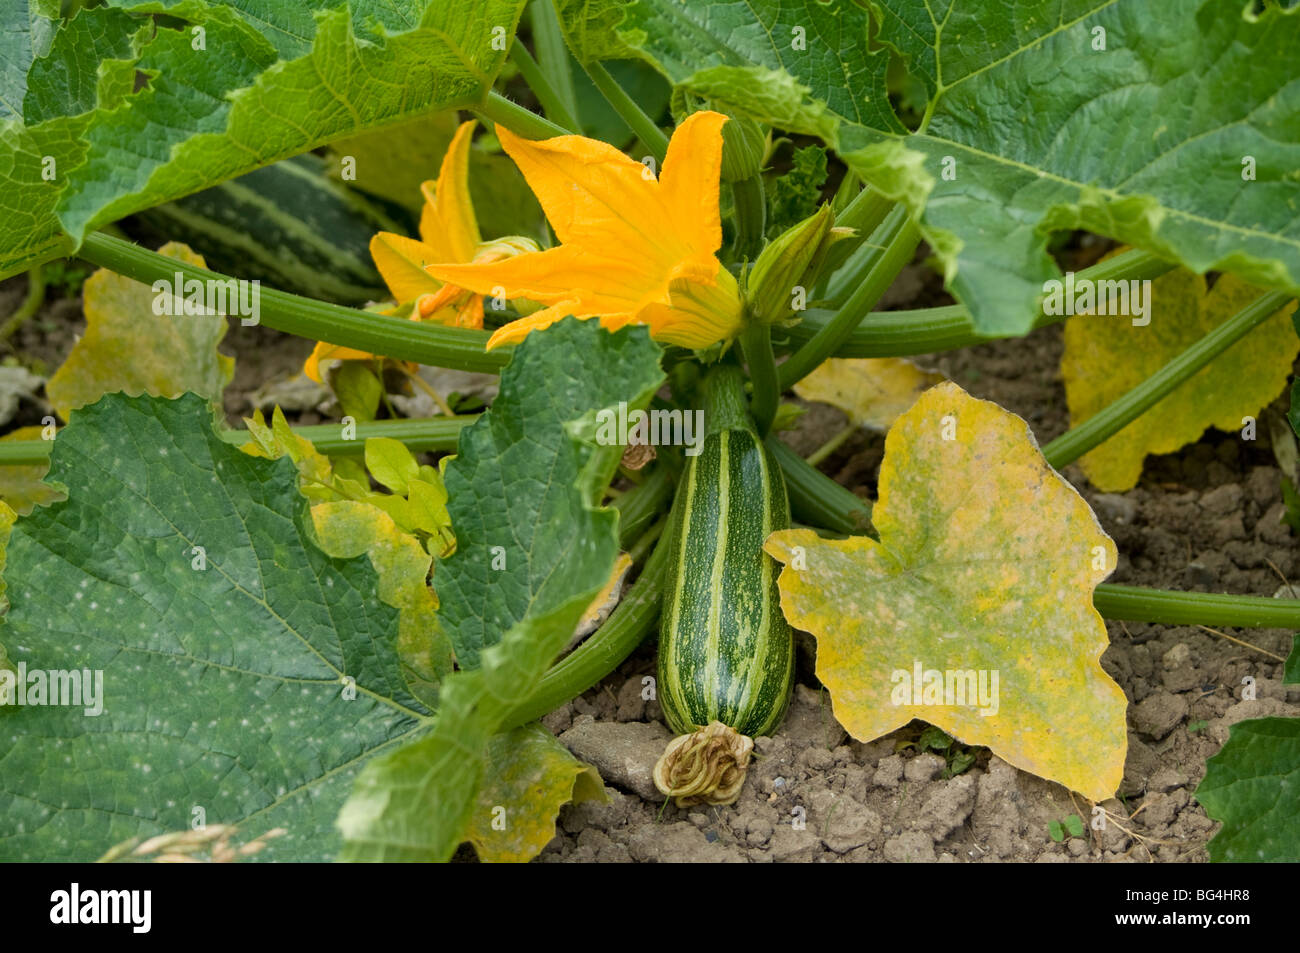 Marrow growing on an allotment showing both fruit and flowers Stock Photo